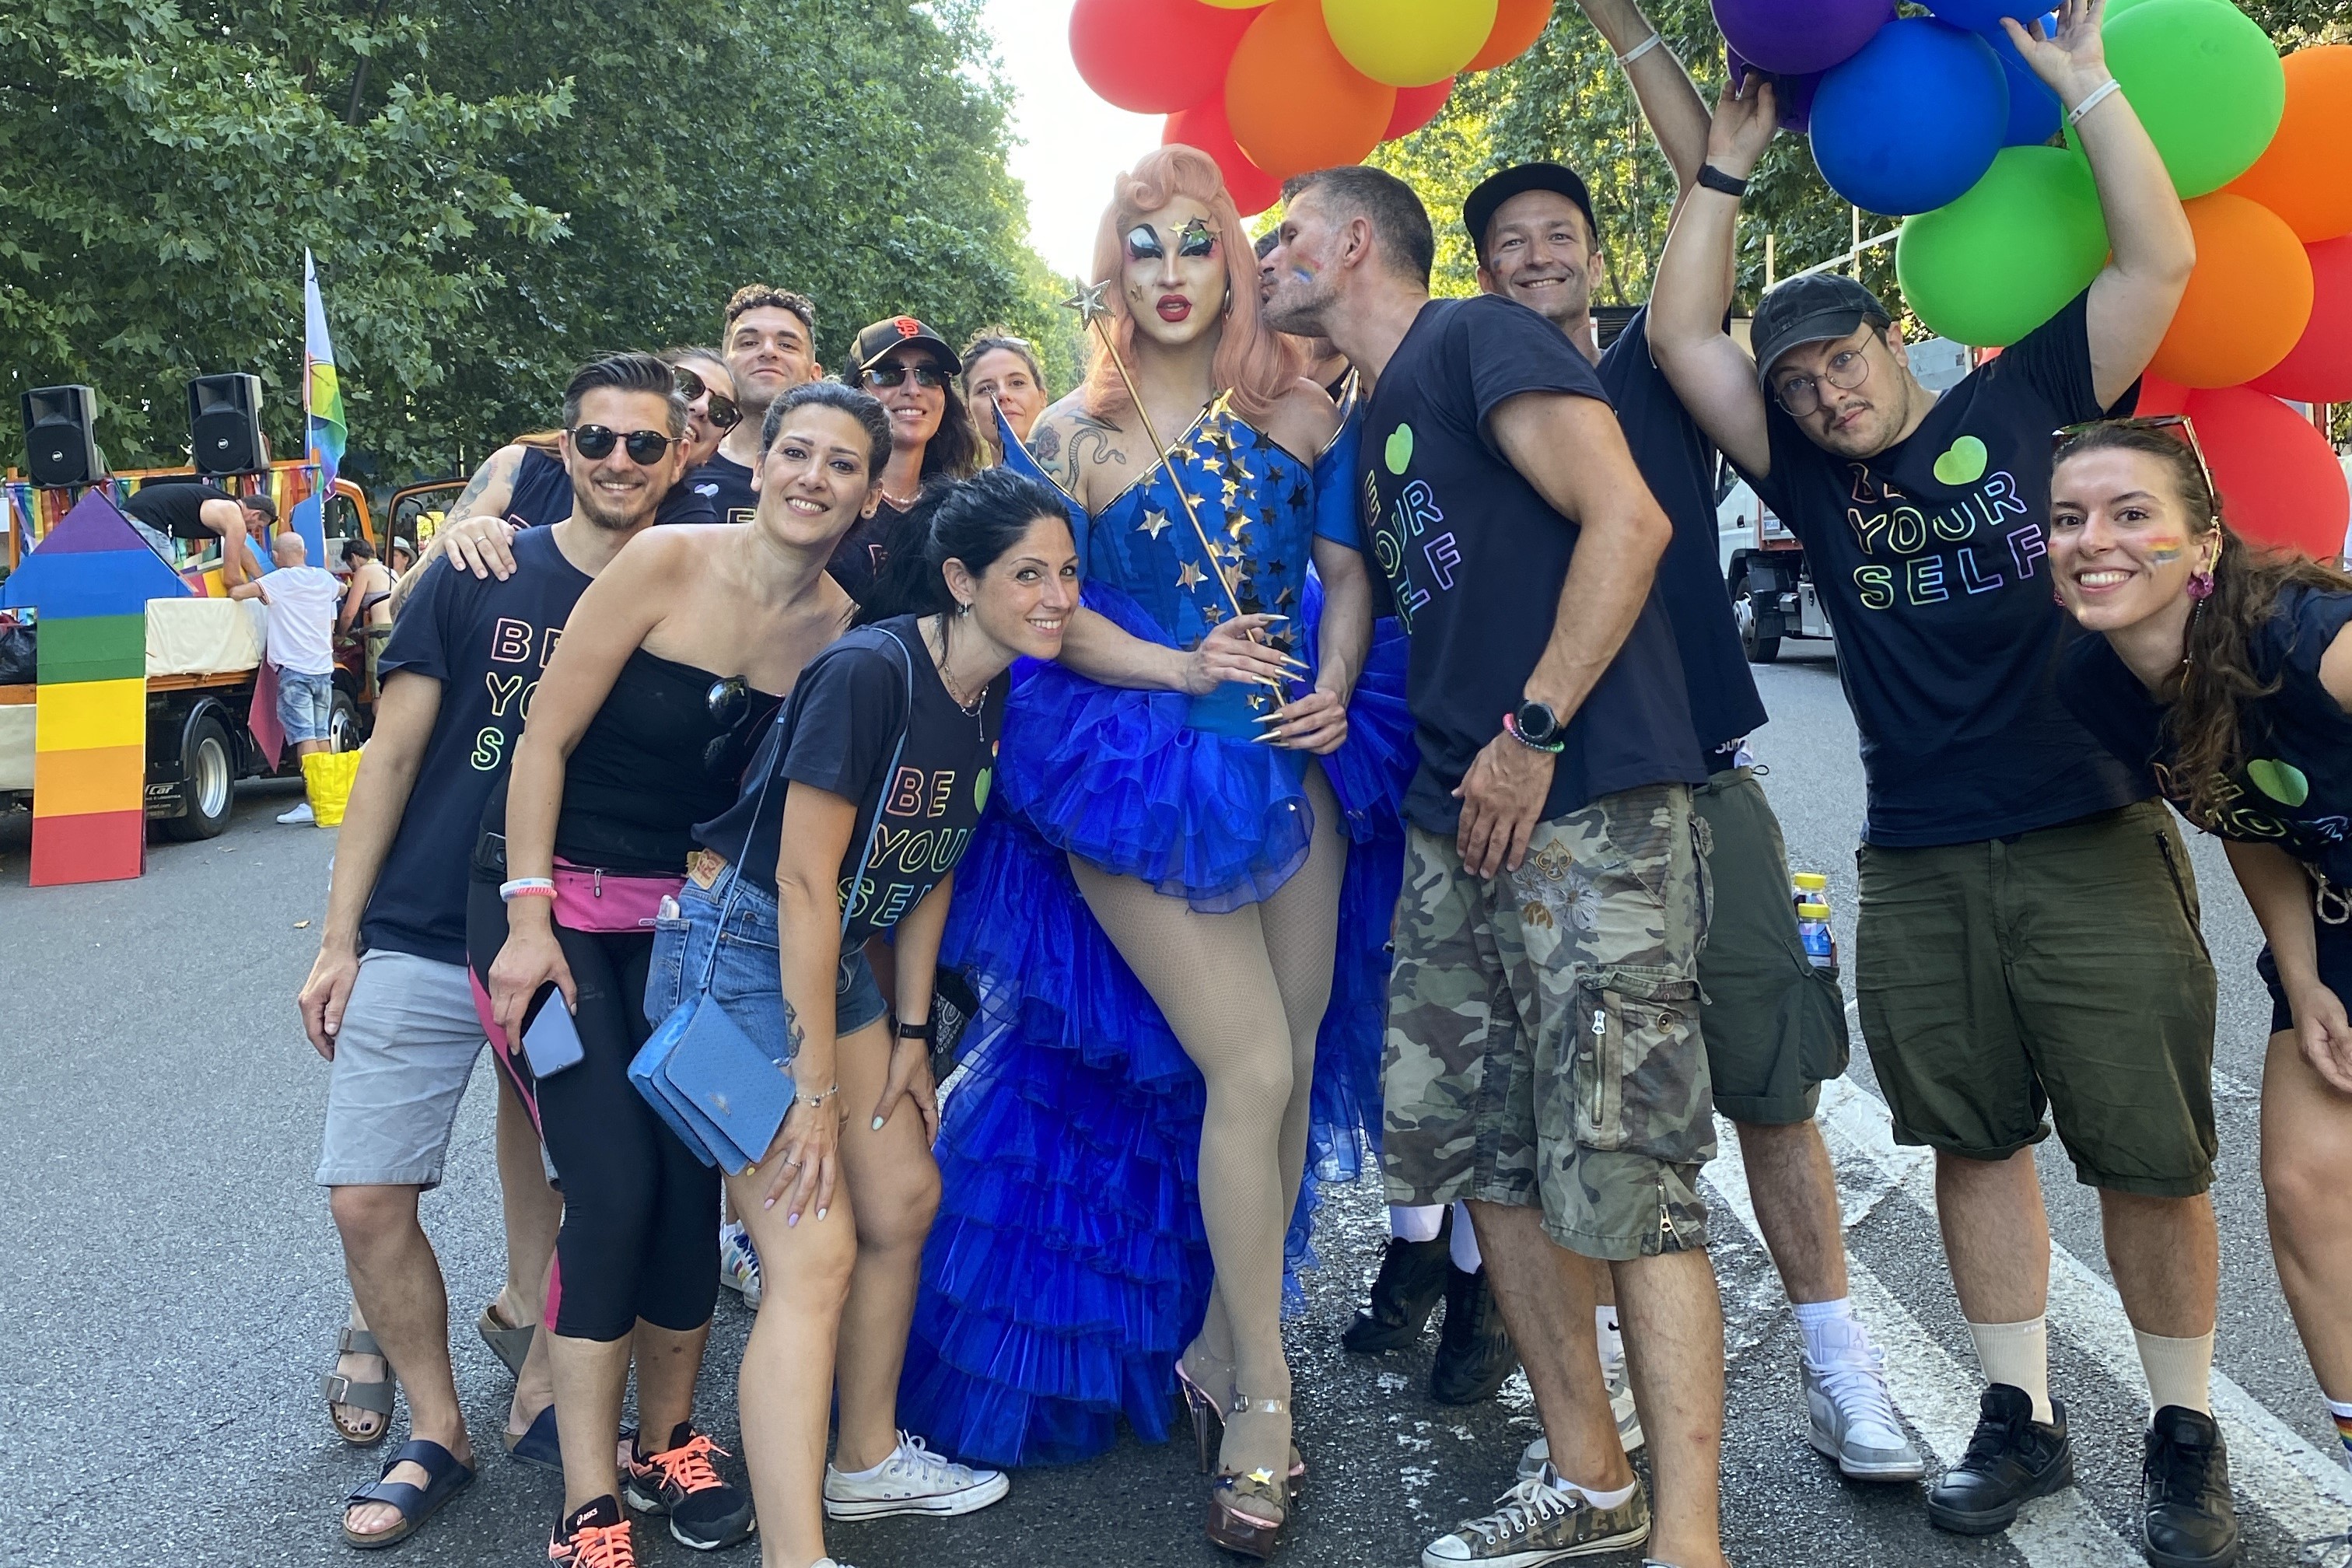 Stevo poses with a group of people at a Pride parade.